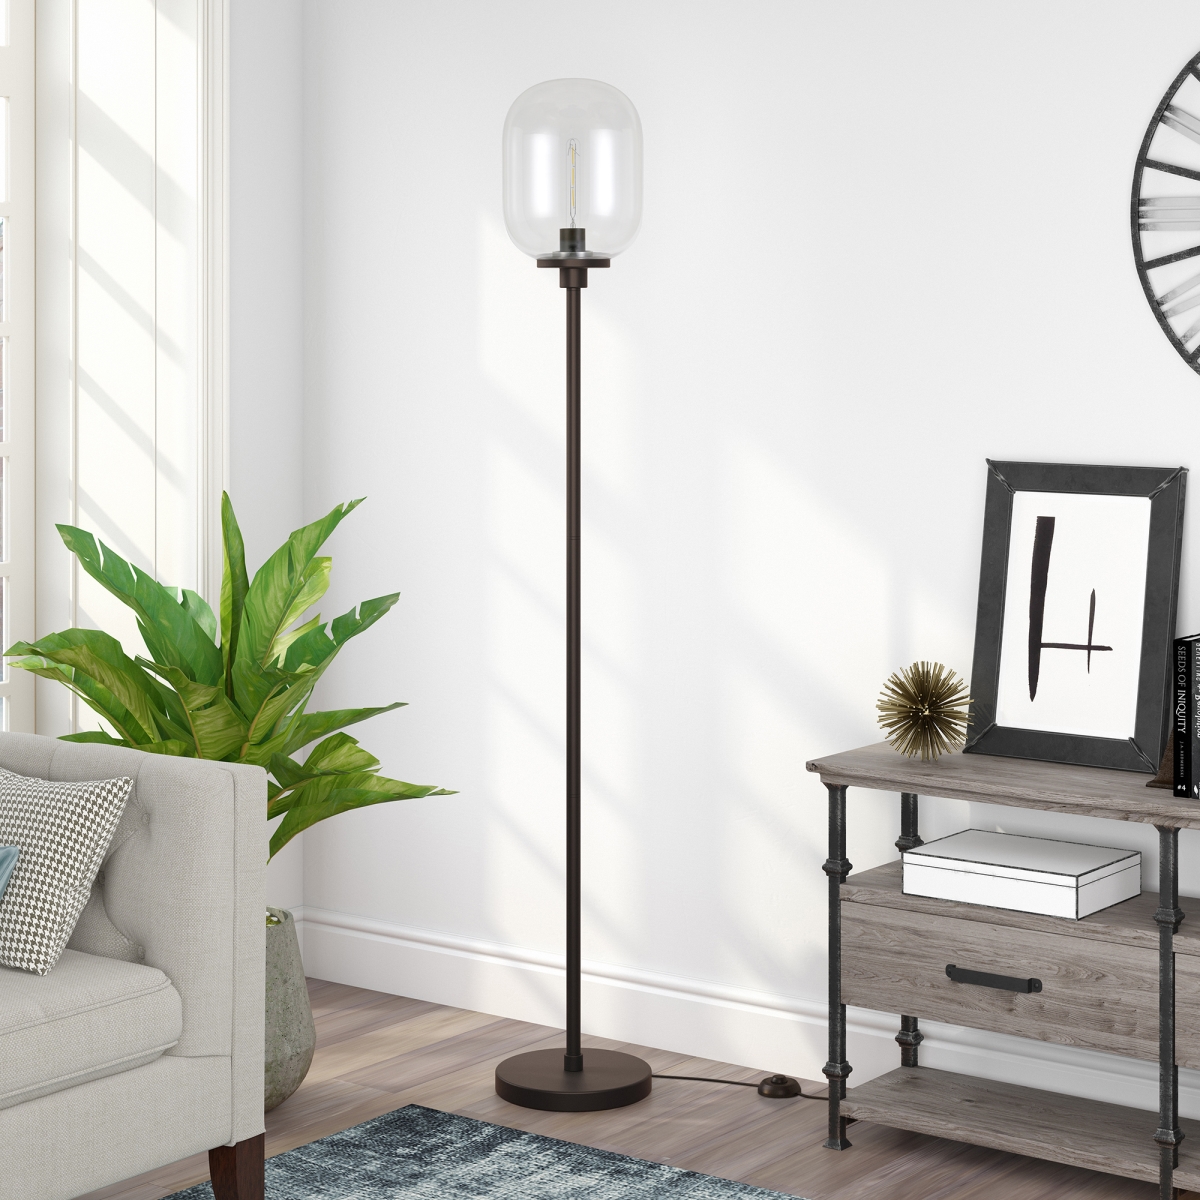 Picture of Henn & Hart FL0187 Agnolo Blackened Bronze Floor Lamp with Clear Glass Shade